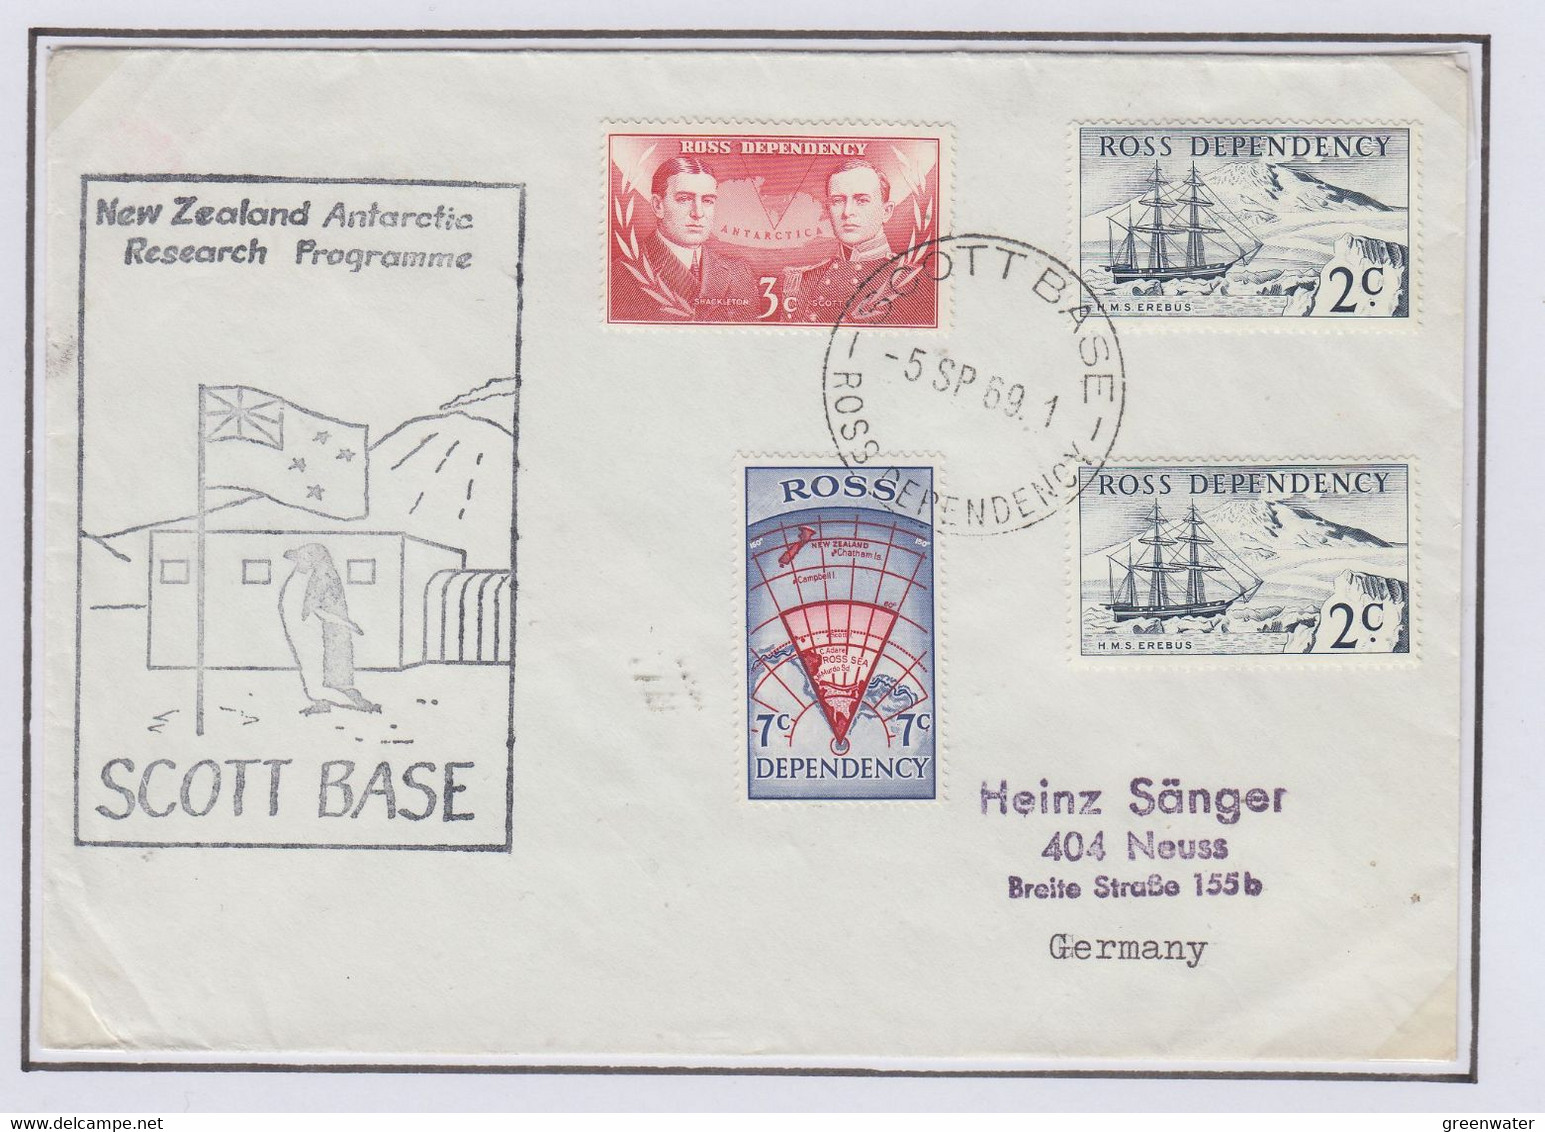 Ross Dependency 1969 Cover Scott Base Ca NZ Antarctic Research Programme Ca Scott Base 5 SP 69 (BO170) - Covers & Documents